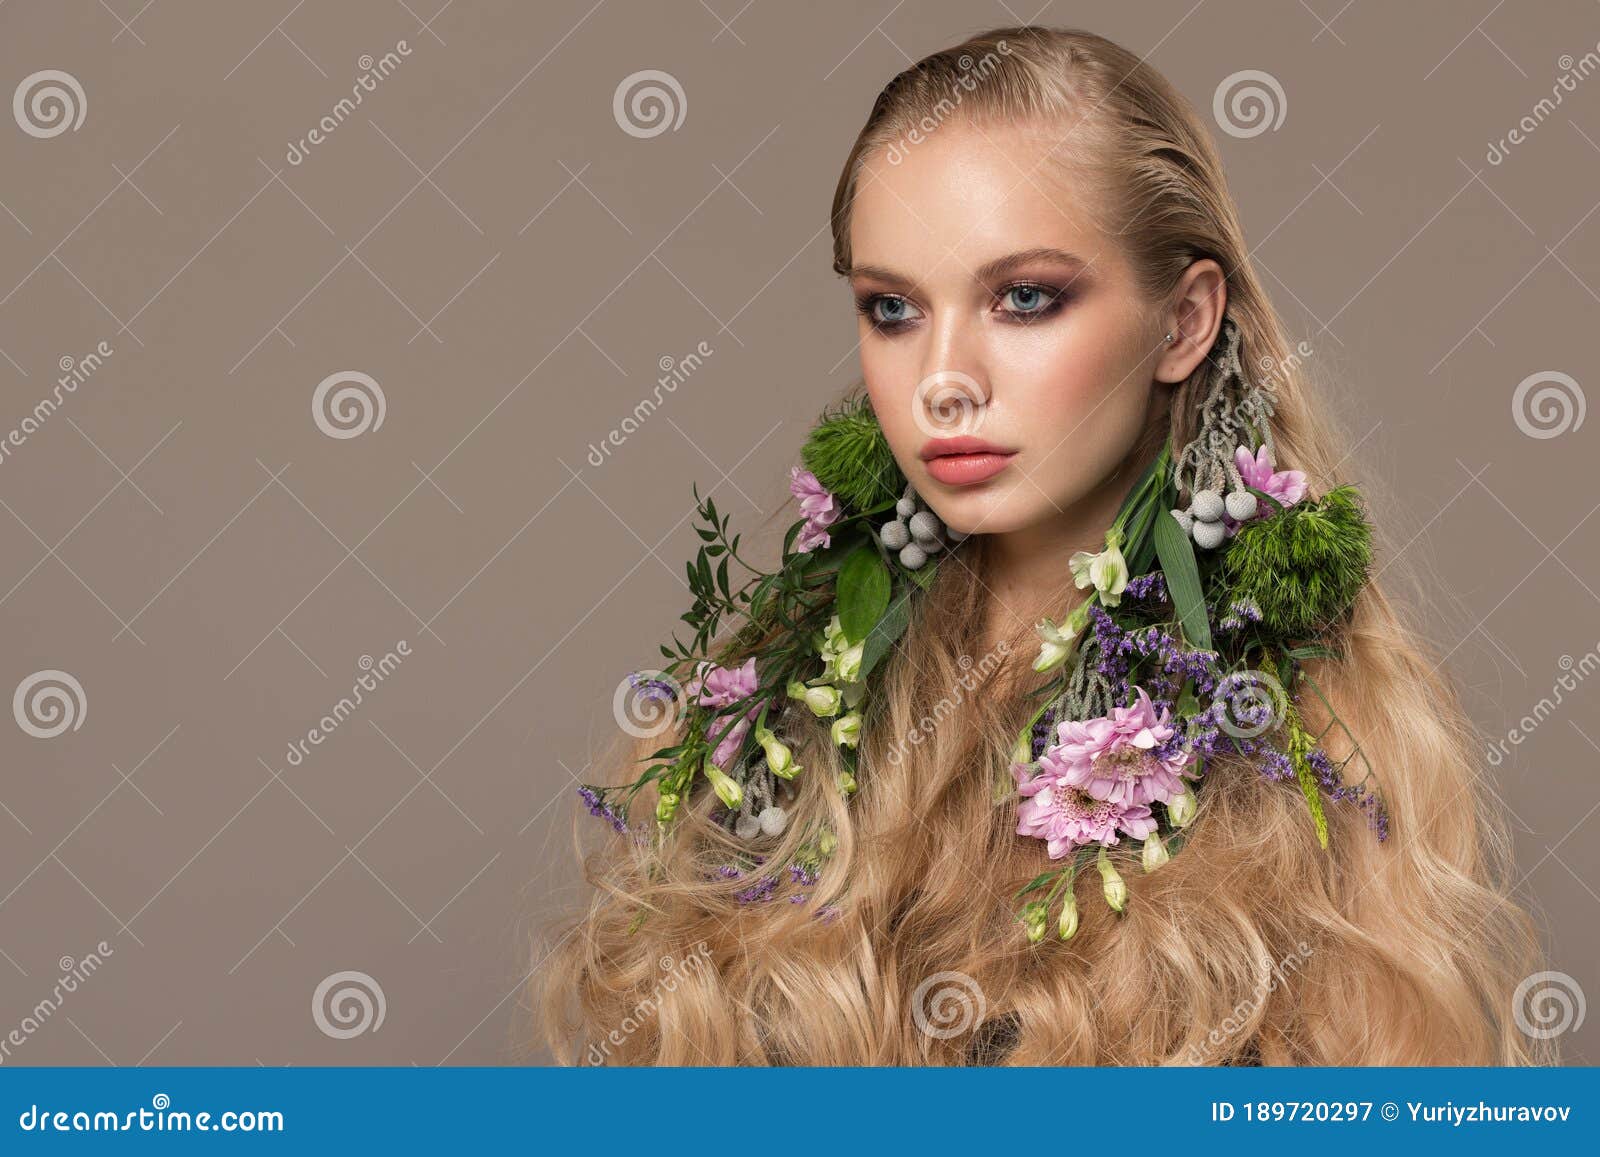 Blonde woman with flowers in her hair - wide 4